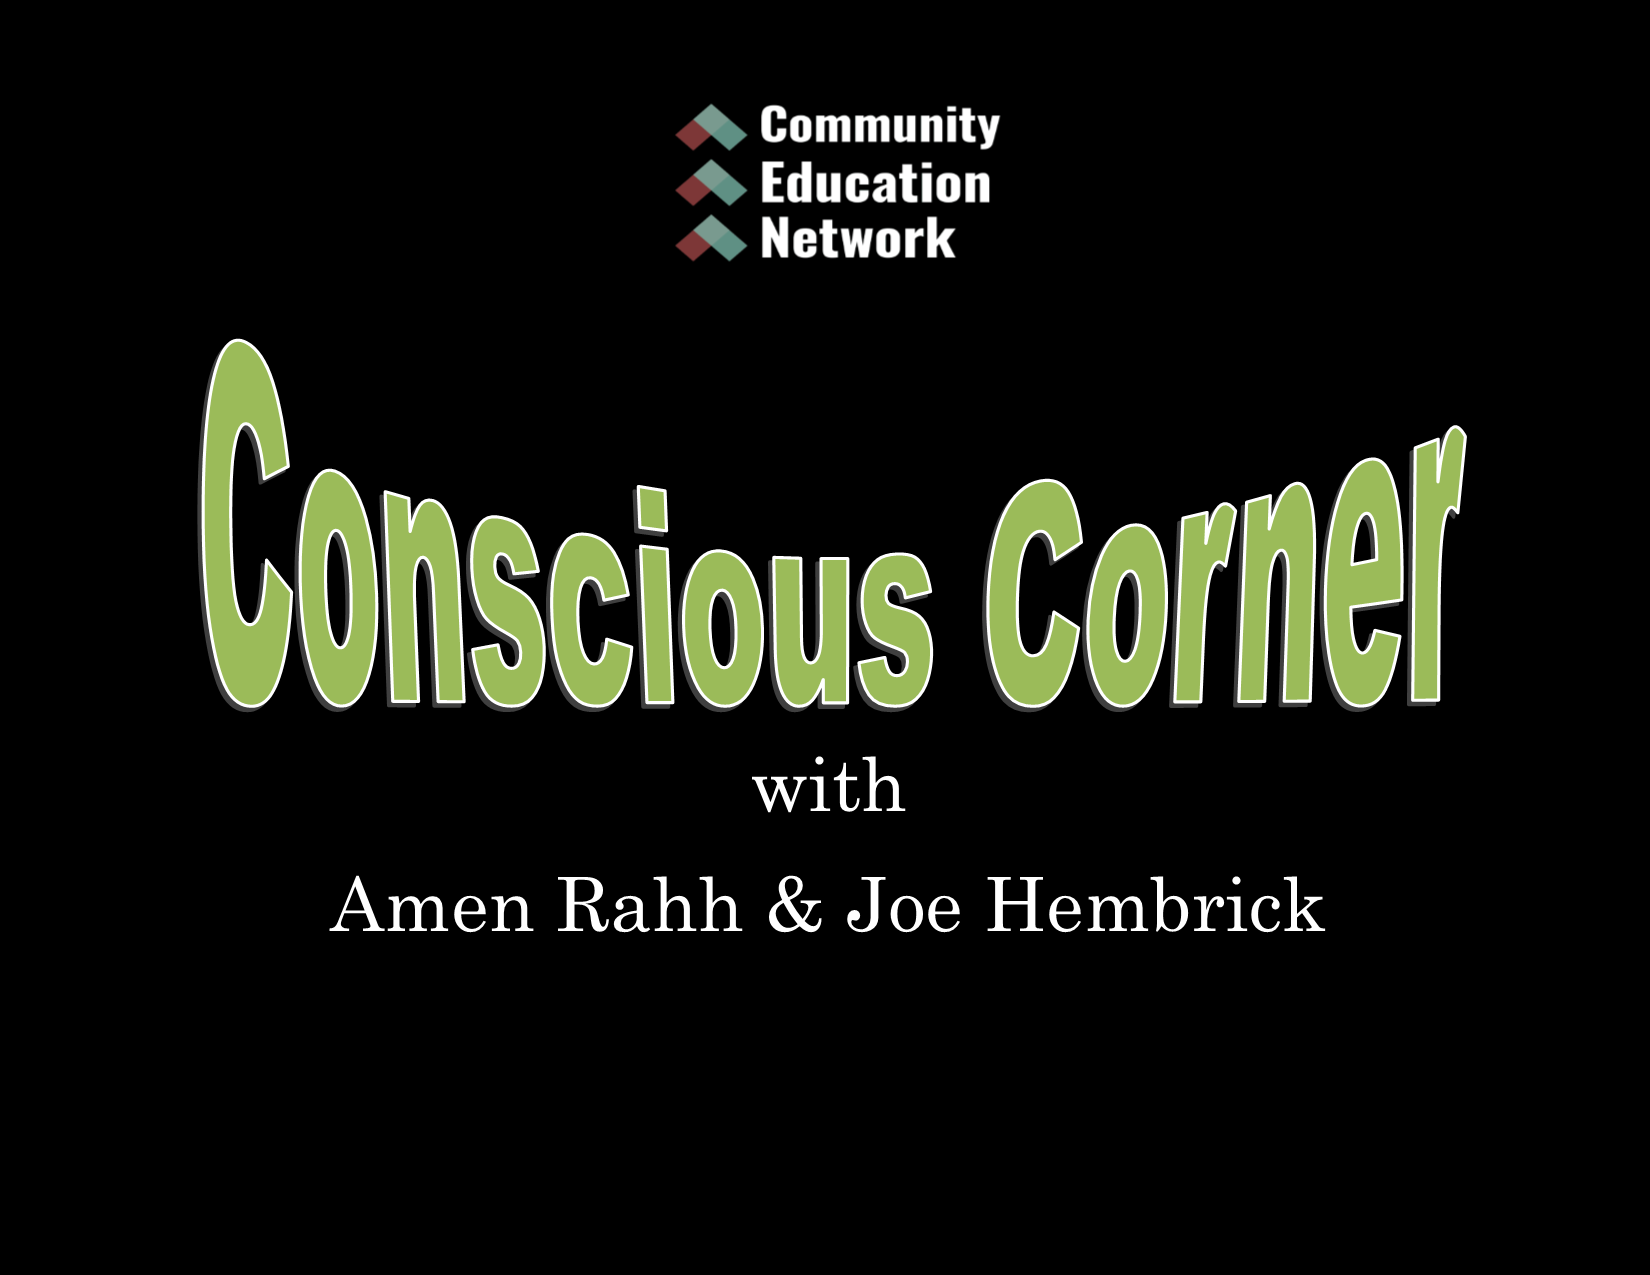 Conscious Corner - Asar (Jerry) Jubal "The Threat of AI to the World"